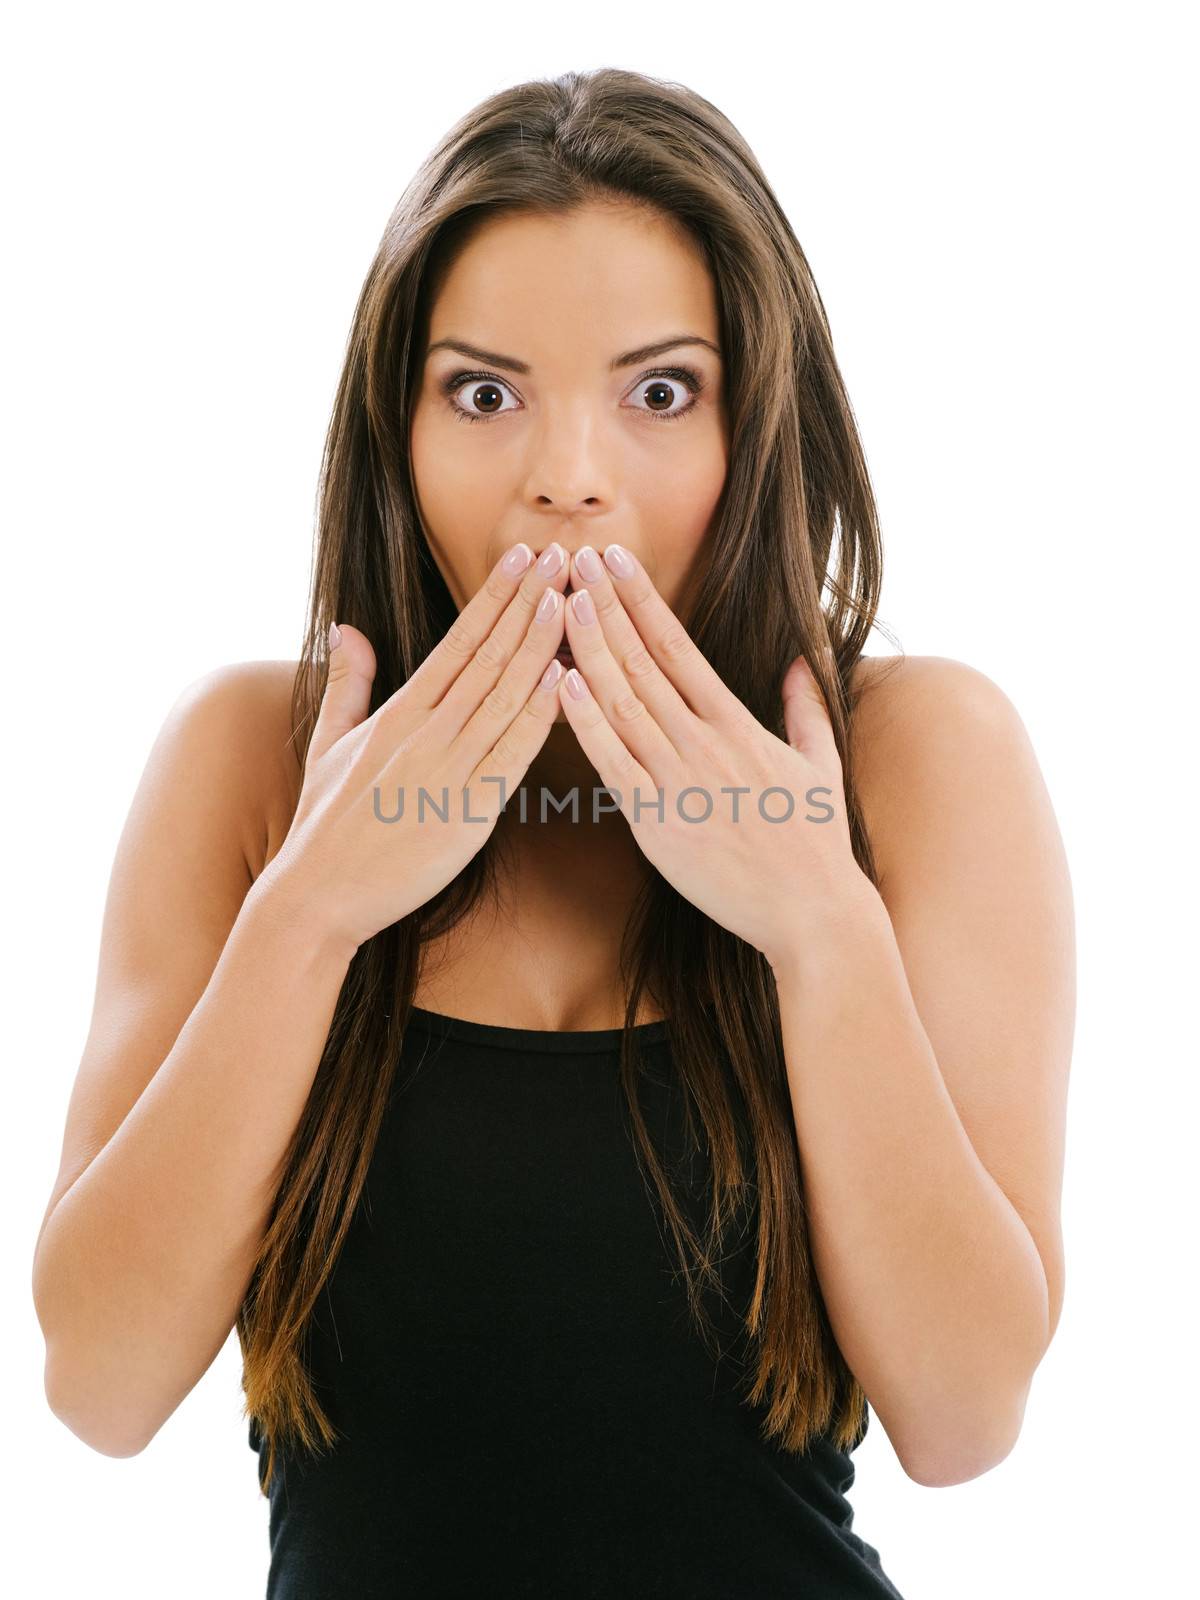 Photo of a beautiful woman with her hands over her mouth and eyes wide from shock.